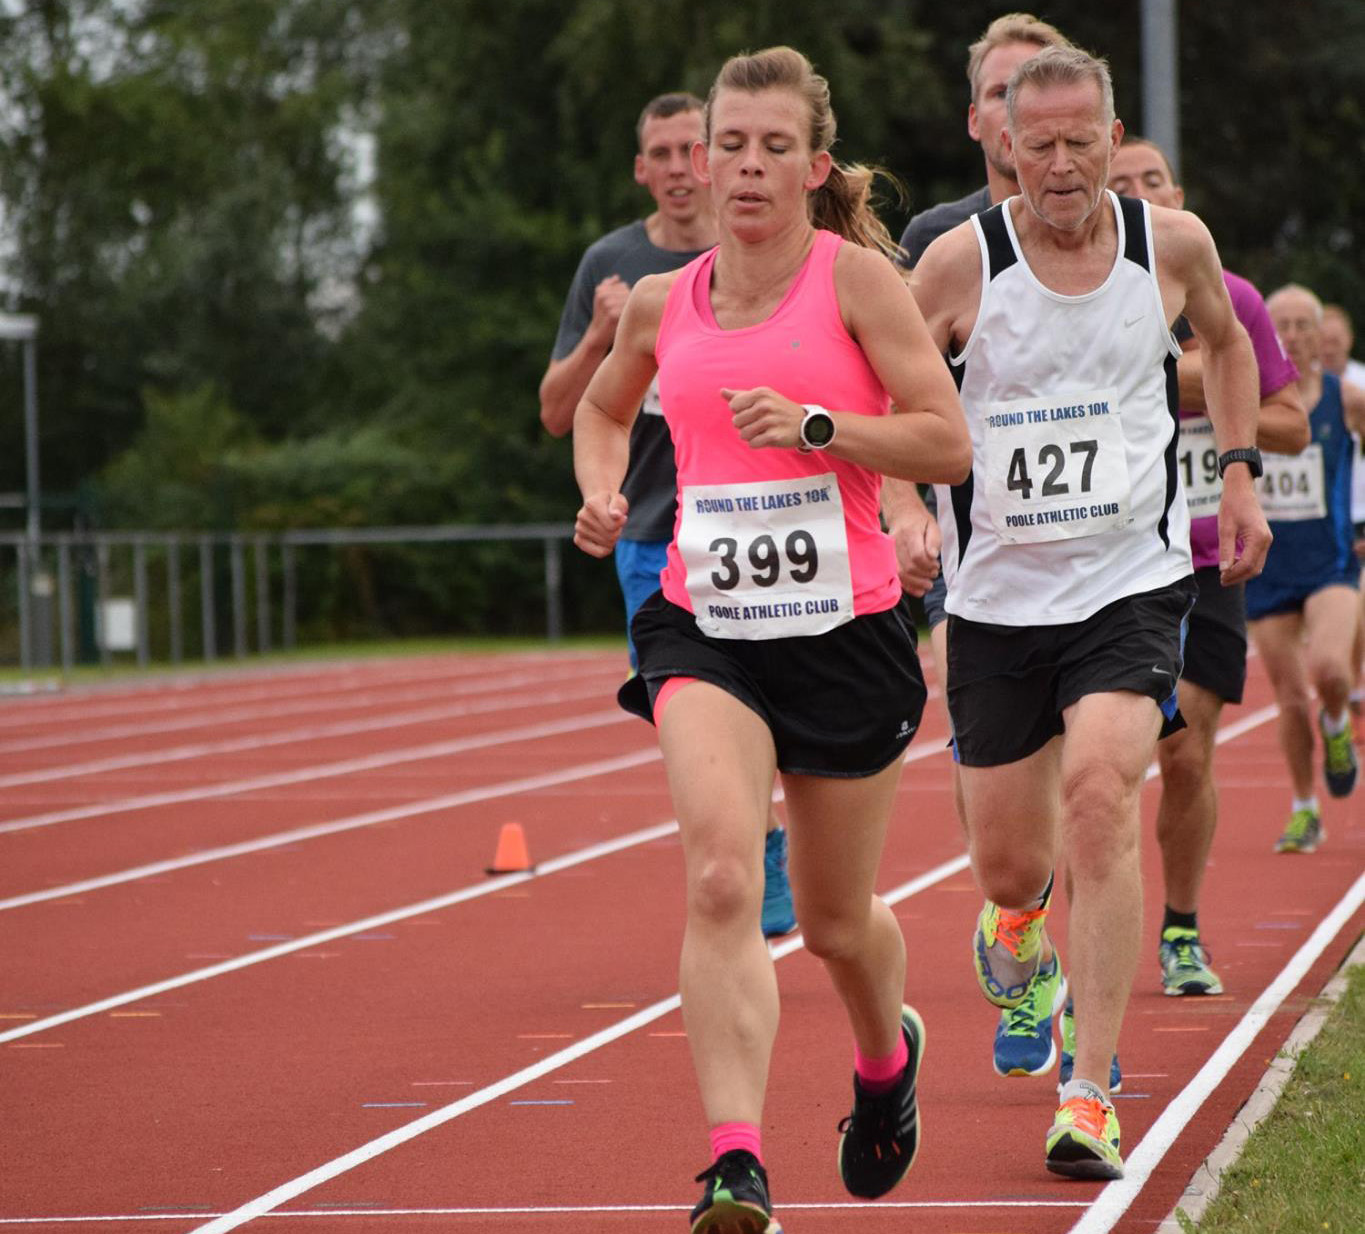 Female runner at 3000m track event at Ashdown, Poole